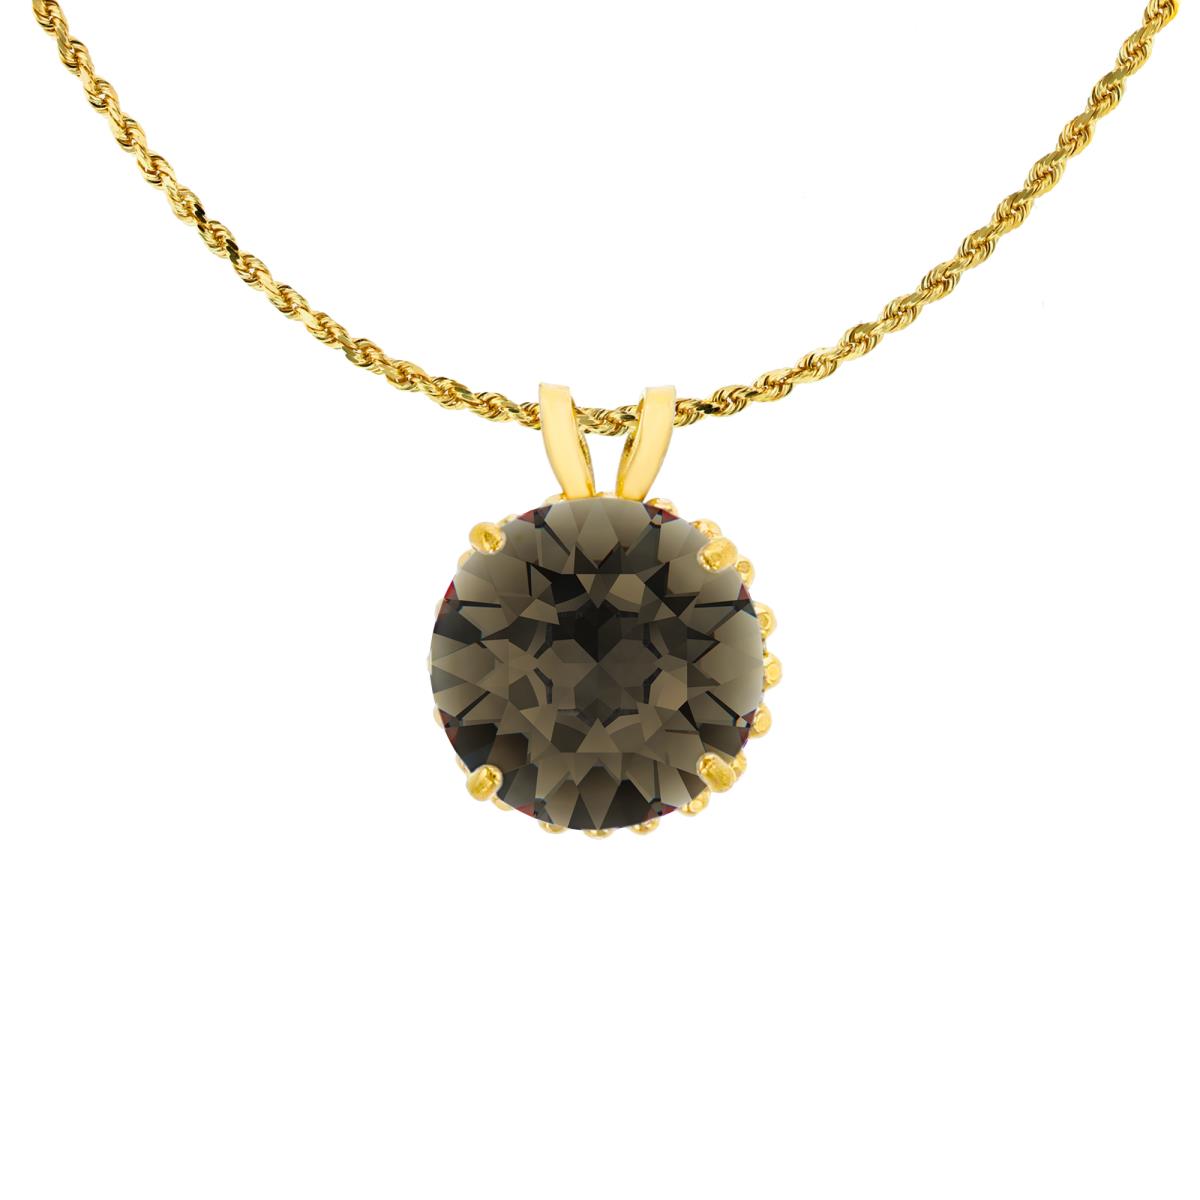 10K Yellow Gold 7mm Rd Cut Smokey Quartz with Bead Frame Rabbit Ear 18" Rope Chain Necklace